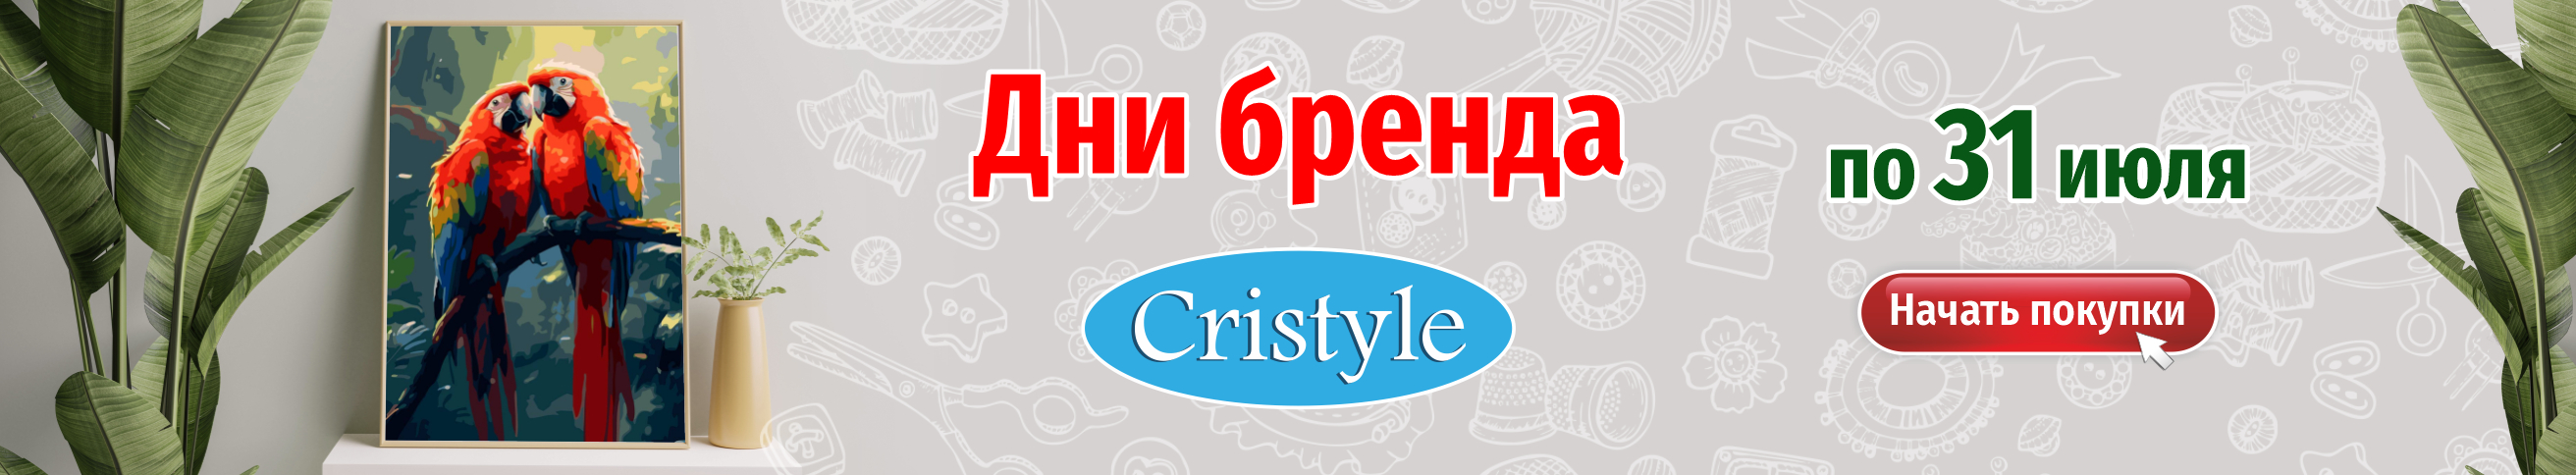 Дни бренда Cristyle